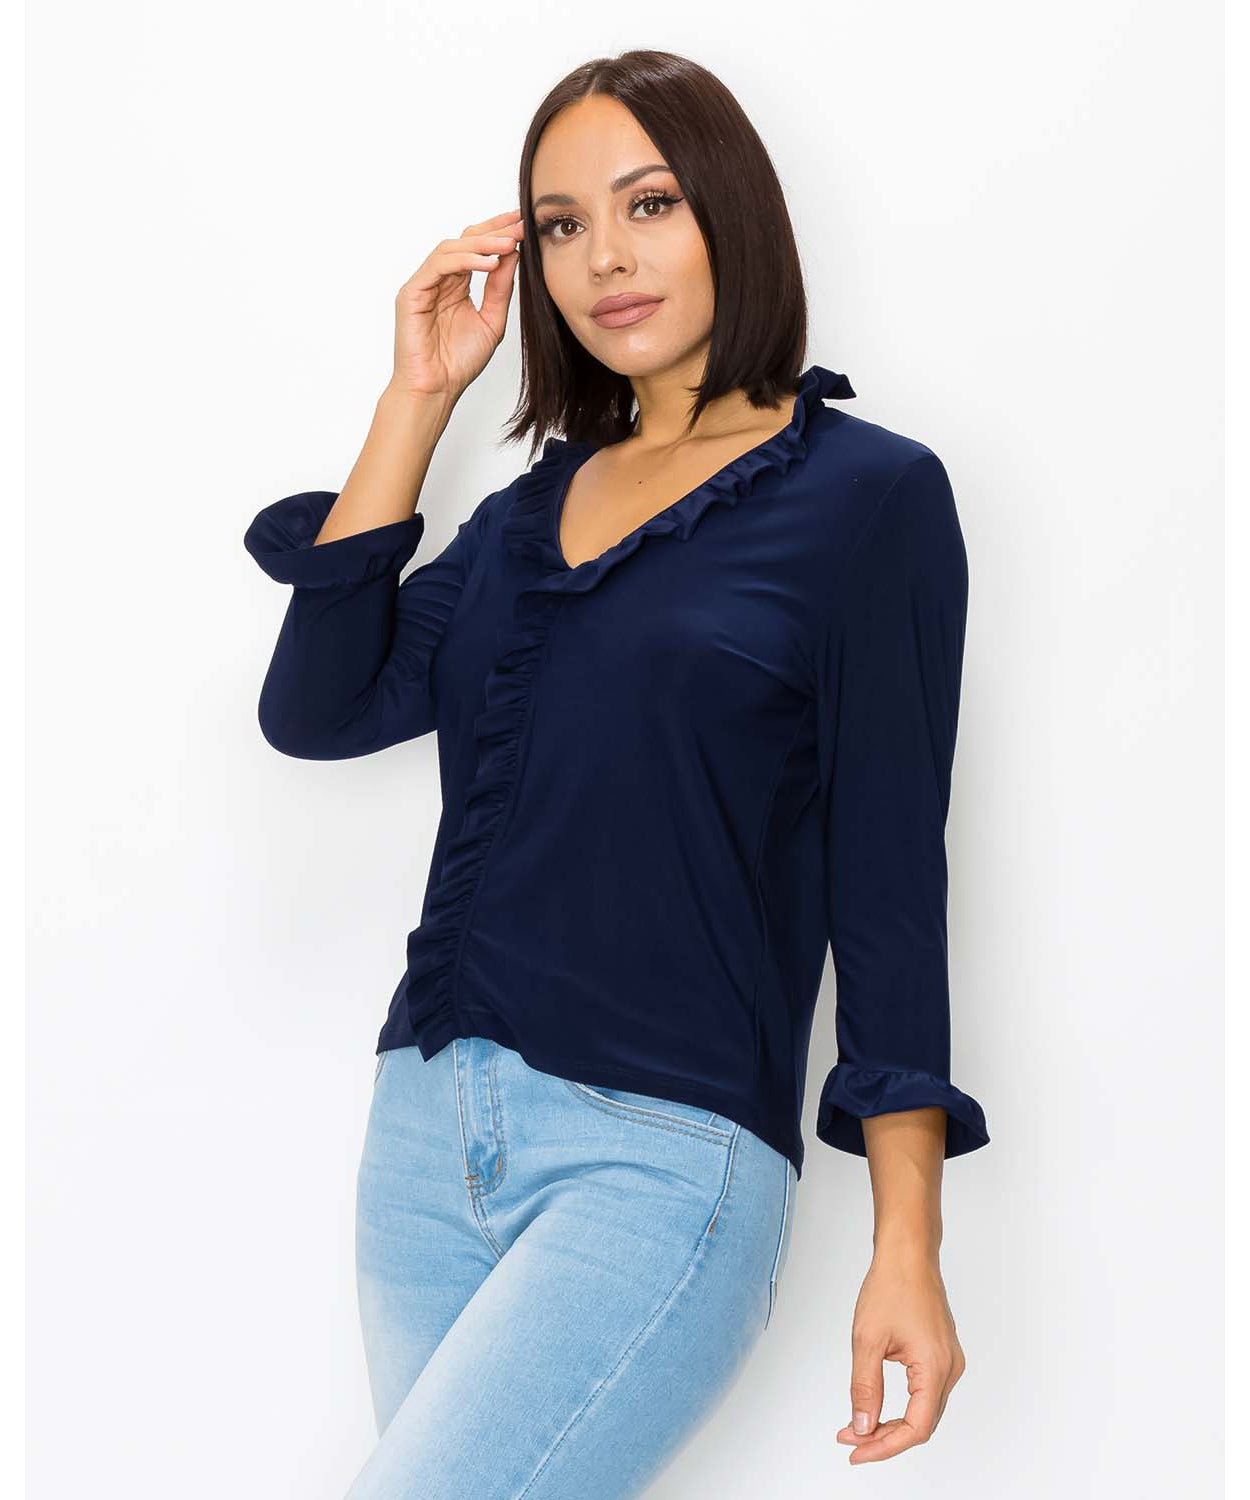 Long Sleeve Blouse With Ruffled Neckline